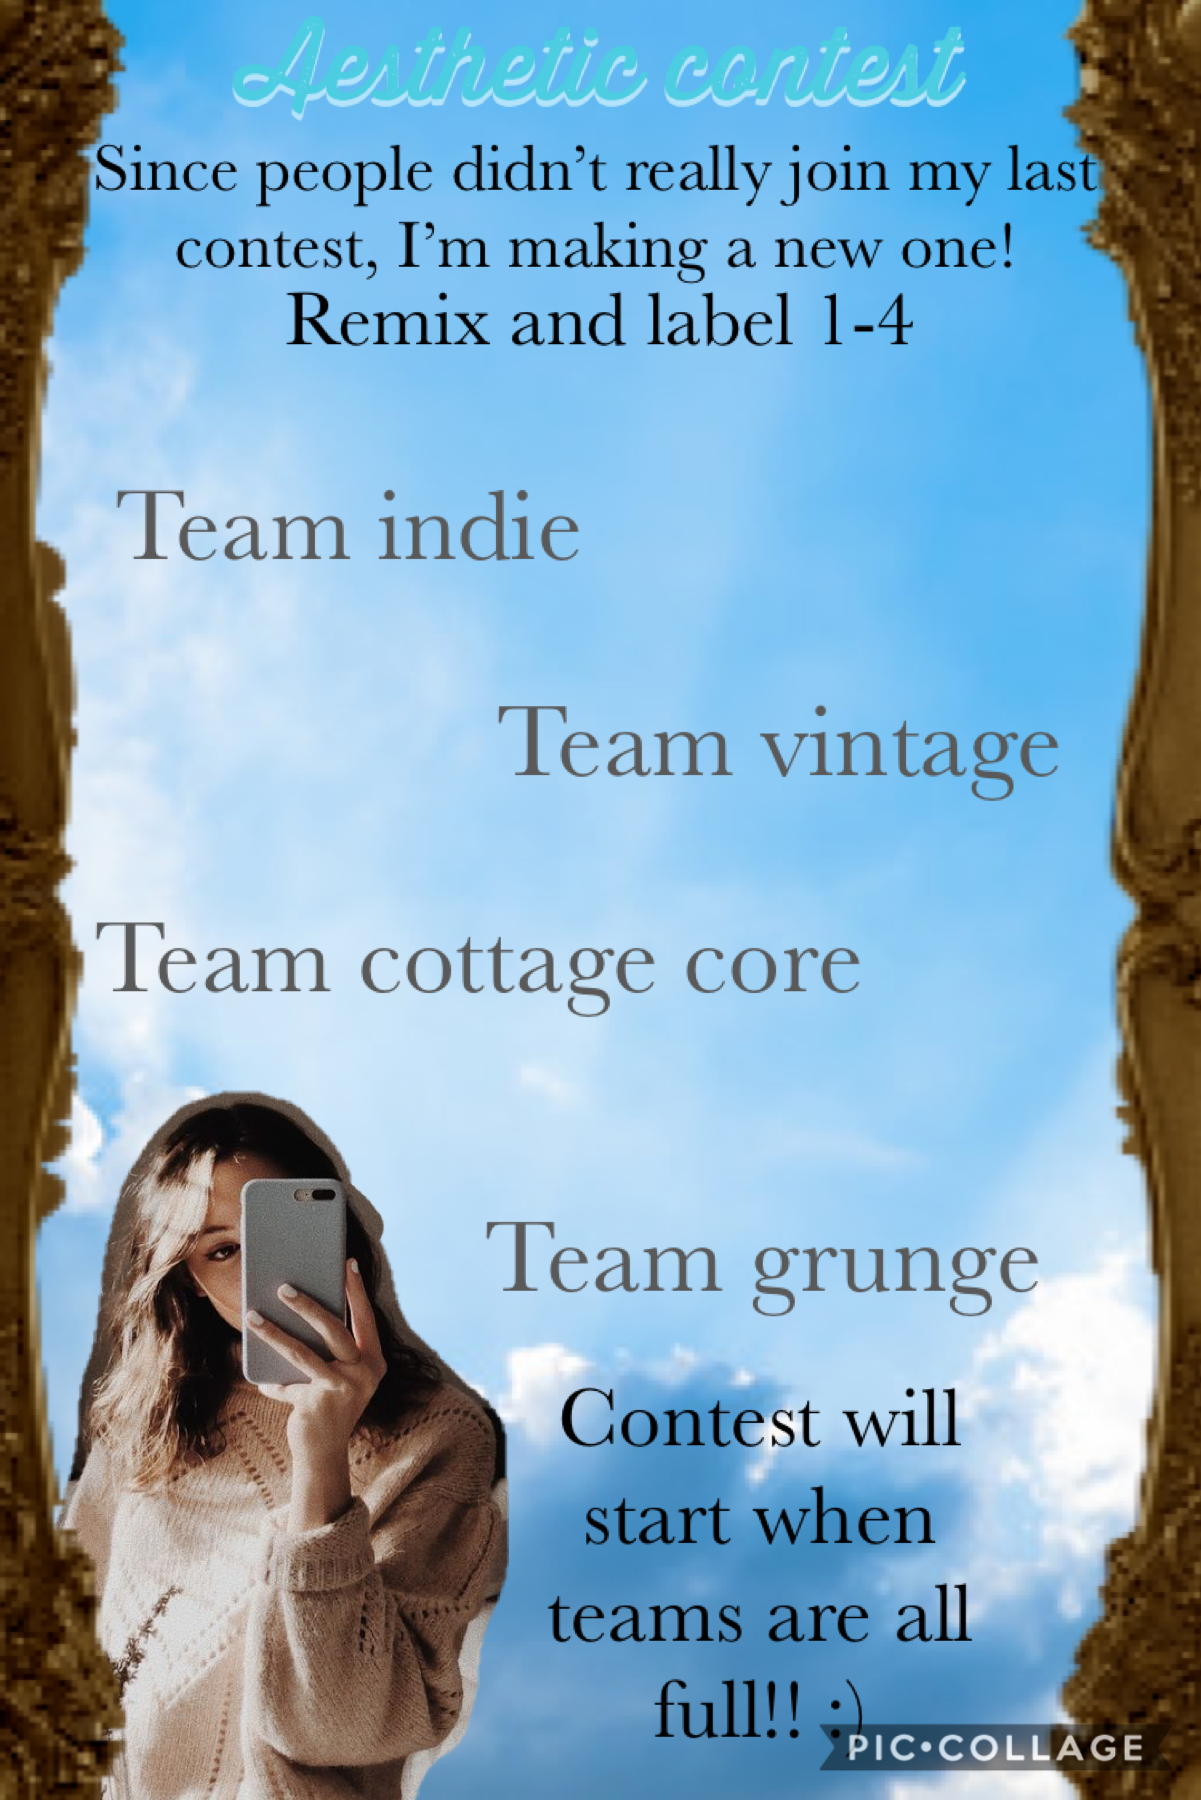 ☁️Contest☁️
Hey skies! Since people either changed their username or left my contest last time, I’m making a new one and hopefully this will be better this time! I’m so excited! ☺️